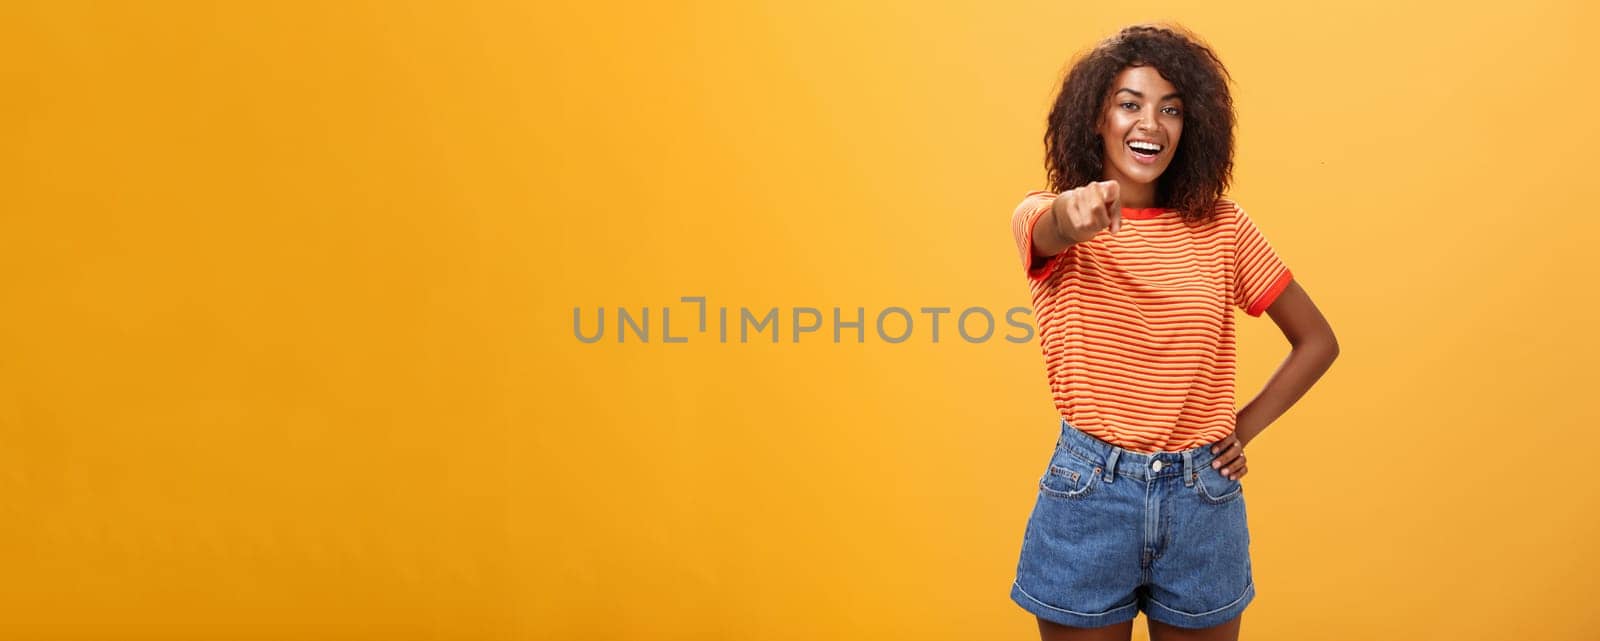 We hire you. Confident happy and awesome dark-skinned fashionable woman with curly hair holding hand on waist pointing at camera with index finger as if picking person or candidate, smiling. Body language concept